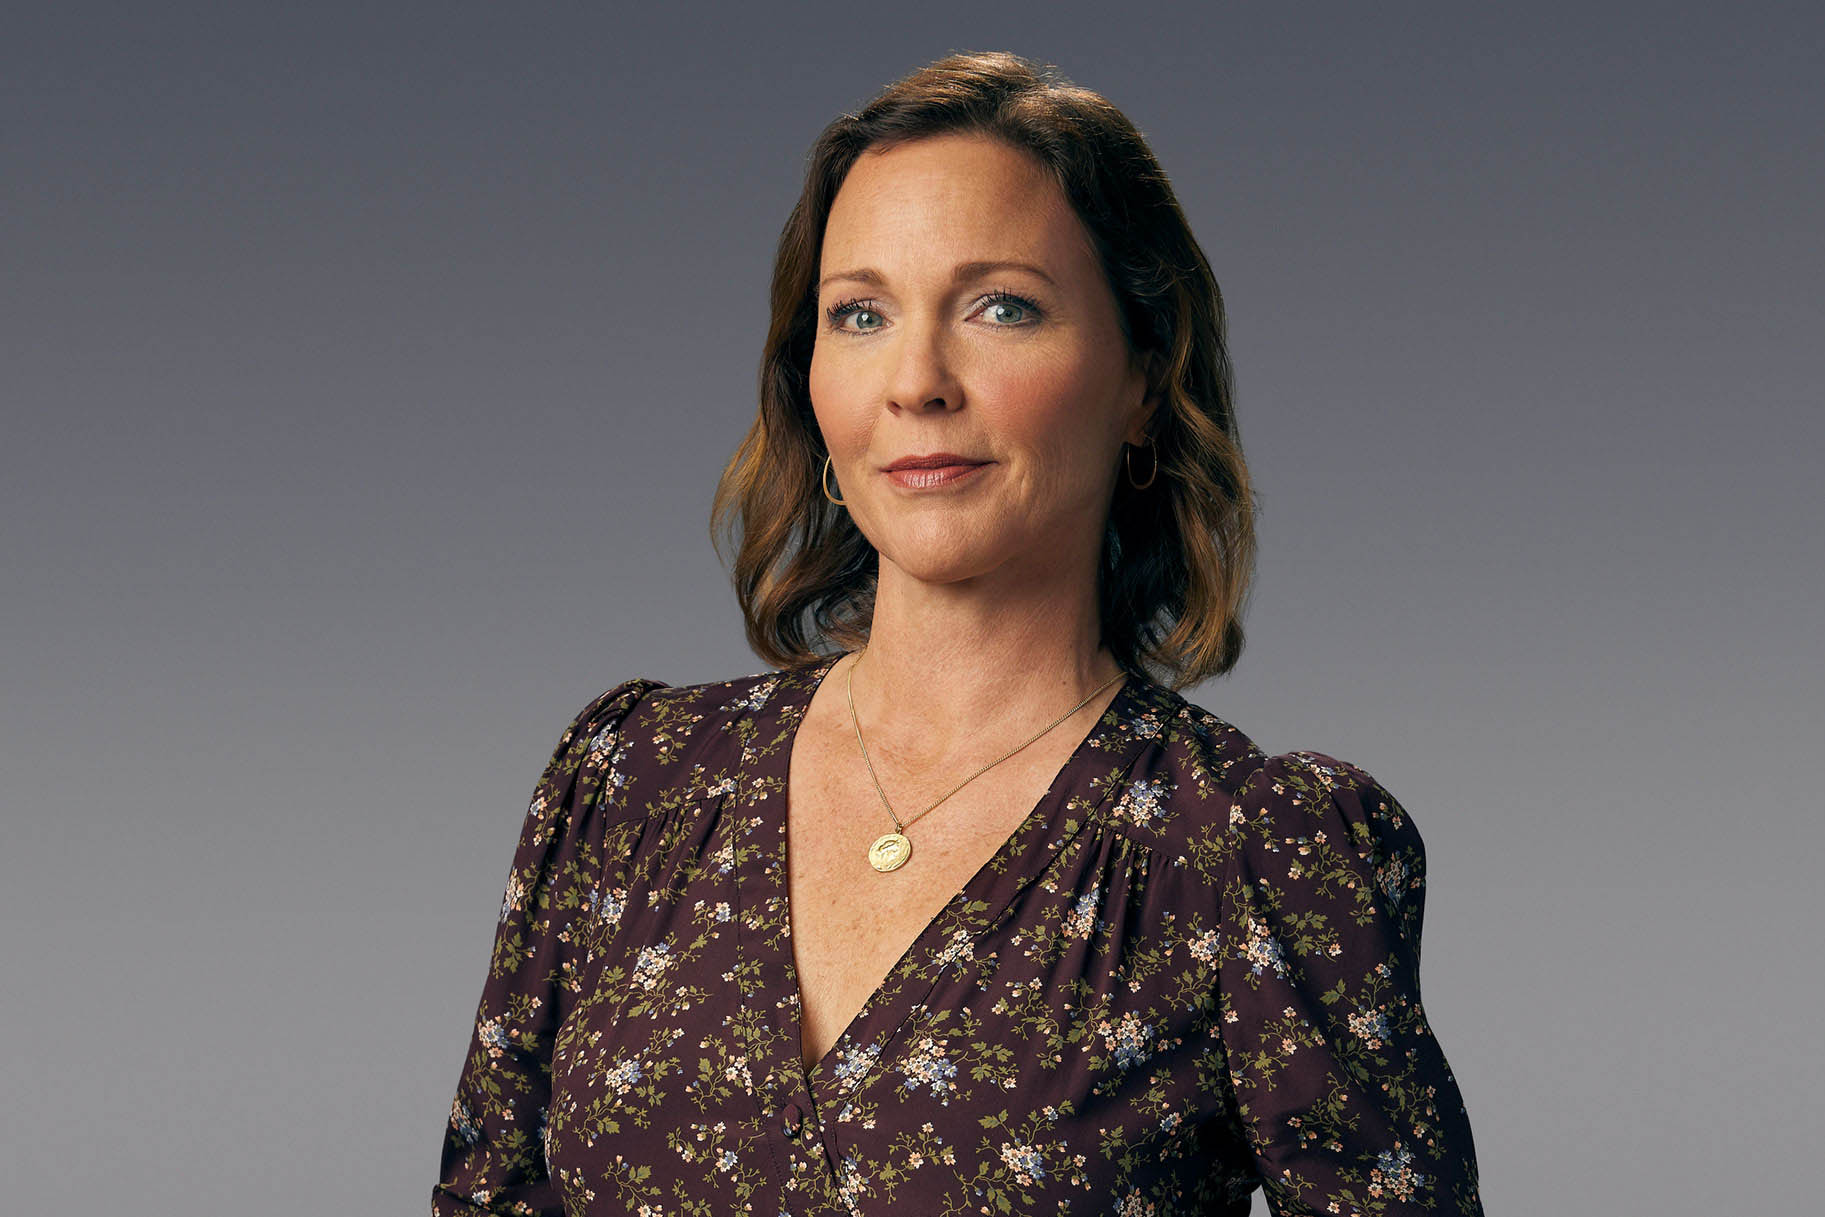 11 Extraordinary Facts About Kelli Williams - Facts.net